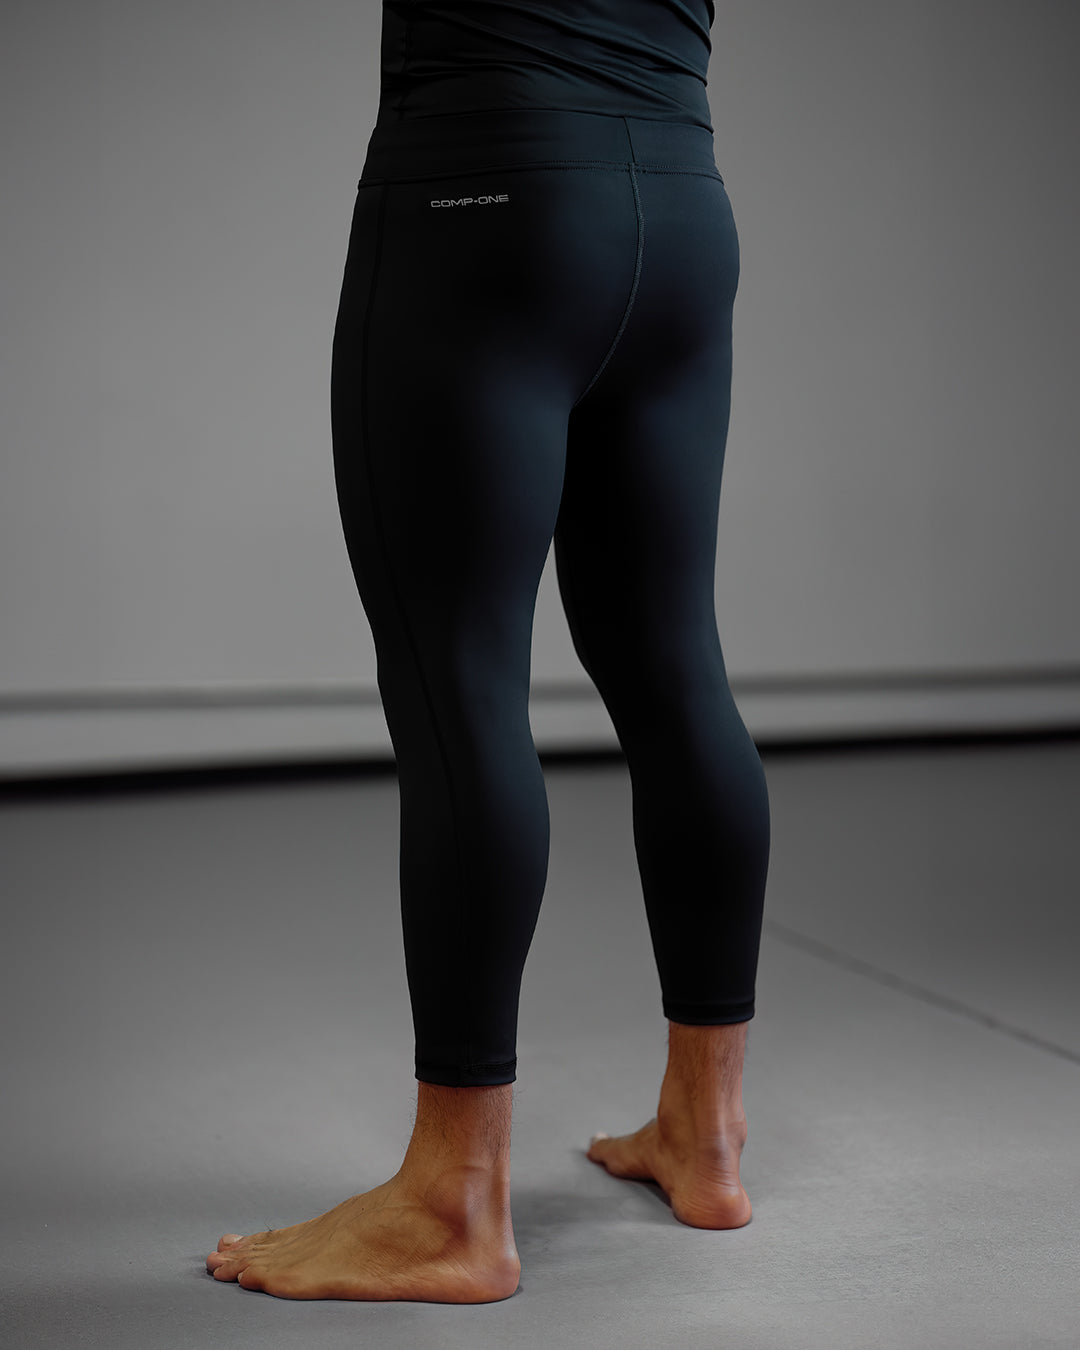 Phalanx jiu jitsu tights for BJJ and MMA, compression pants perfect for No Gi Jiu Jitsu, Brazilian Jiu-Jitsu and Mixed Martial Arts - all grappling, wrestling, surfing, yoga - all athletics! Workout clothes for a wide range of everyday sports, gym wear and exercise activities.